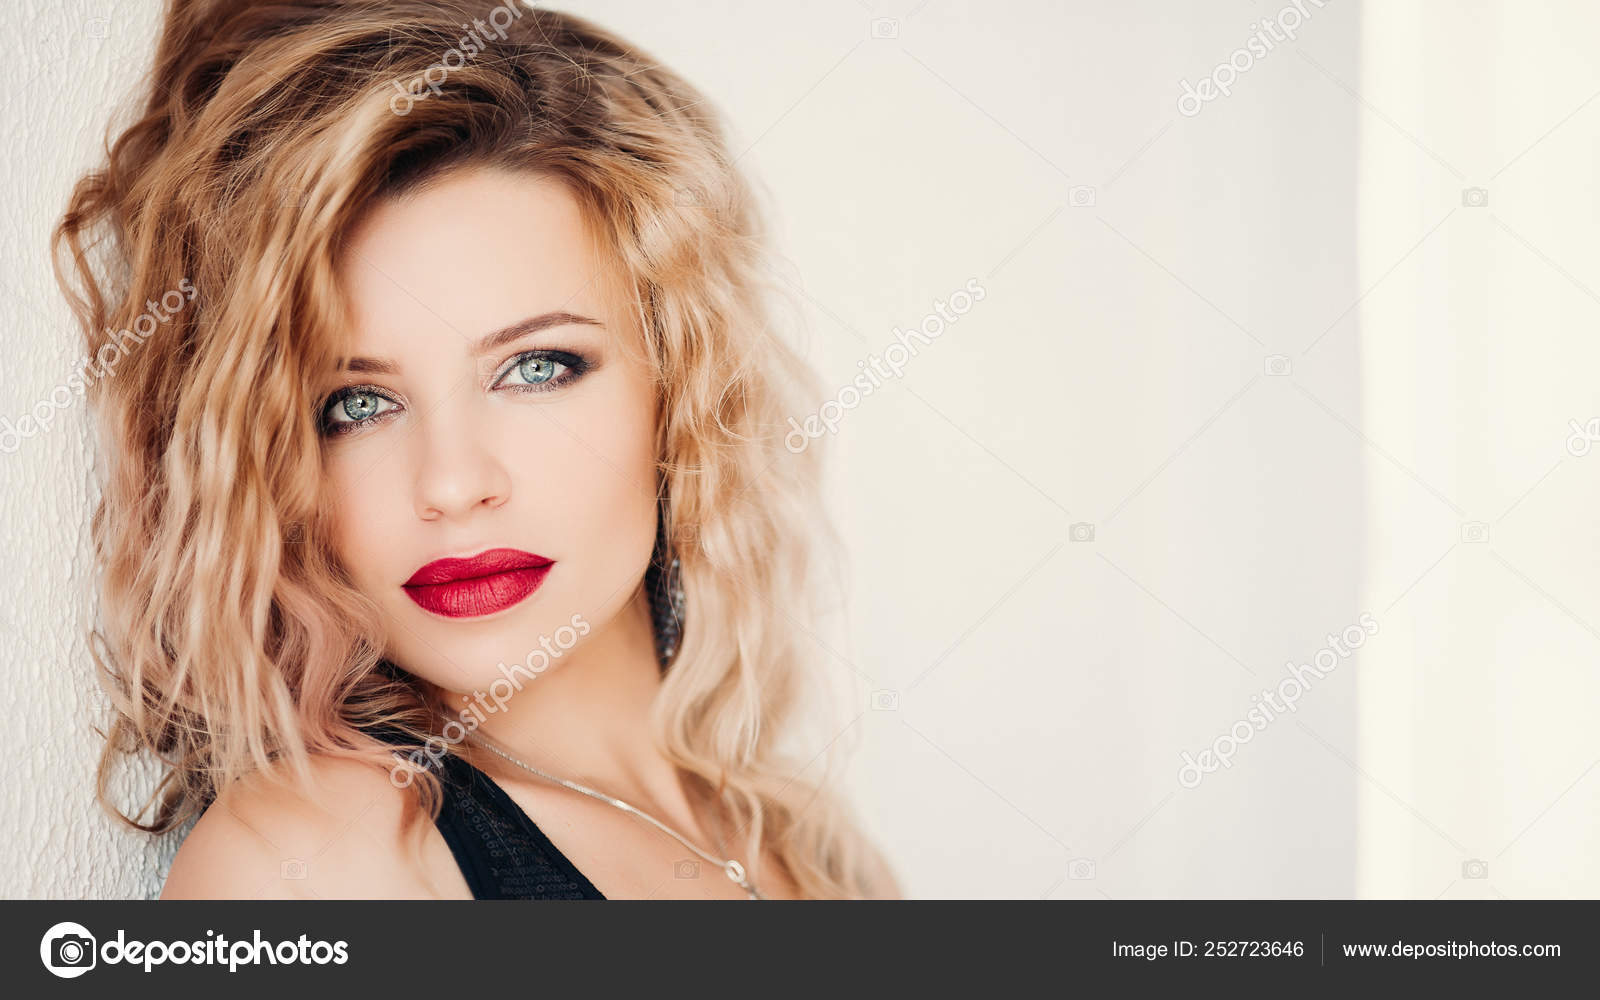 3. Wavy Blonde Hair Model High Resolution Stock Photography and Images - Alamy - wide 1